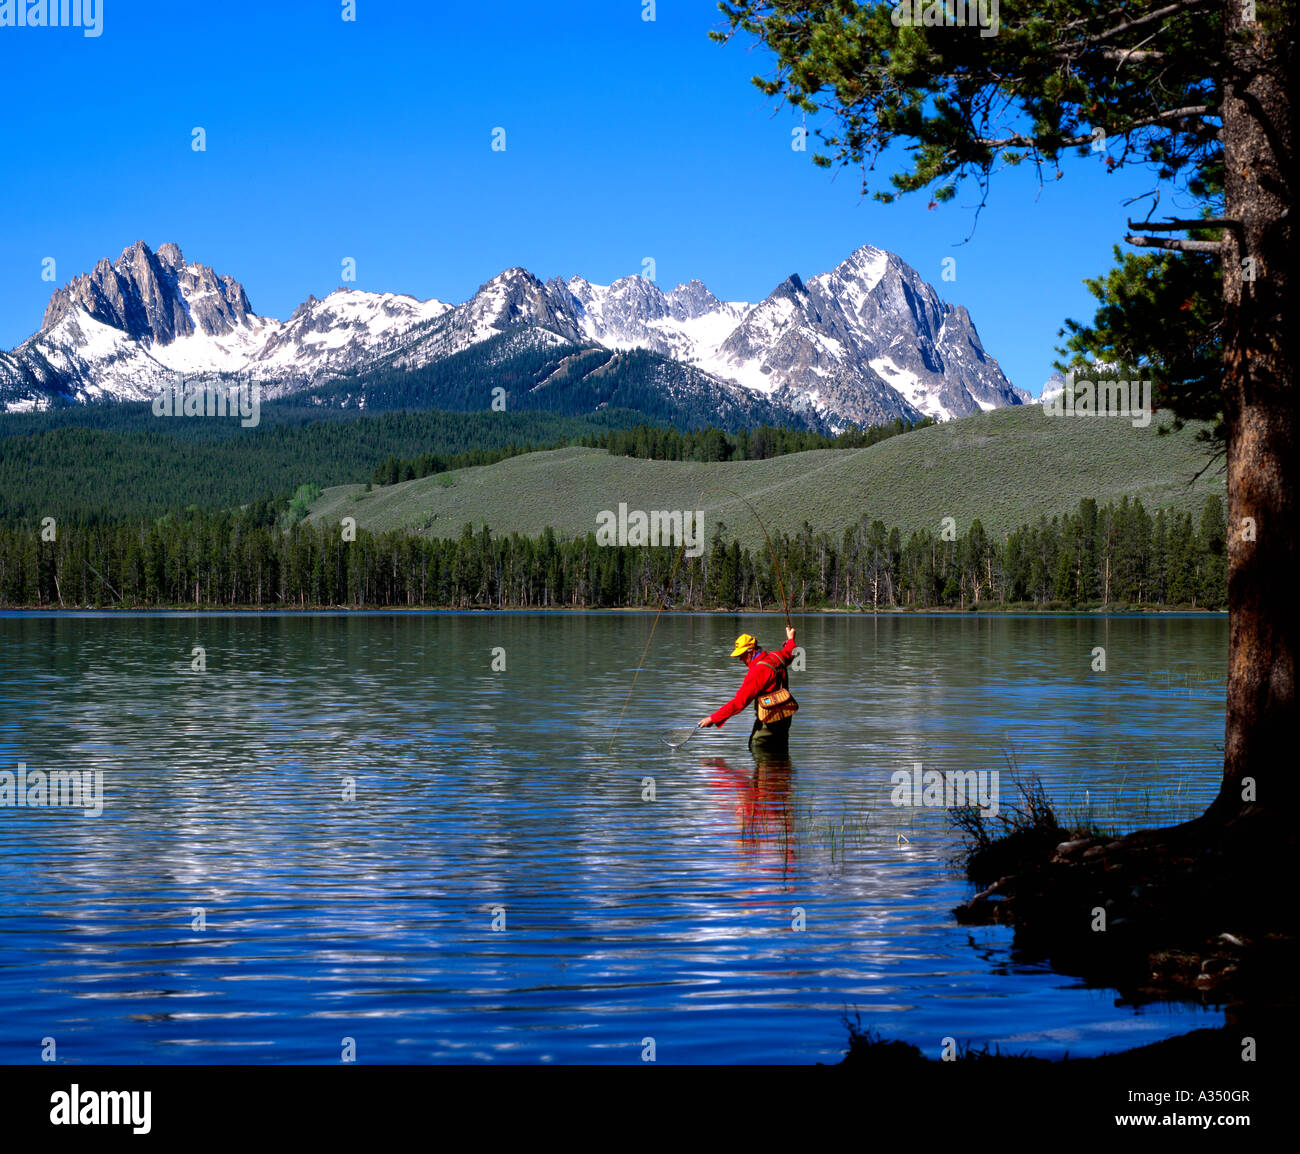 Fly fisherman netting a trout at Little Redfish Lake in the Sawtooth National Recreation Area of Central Idaho Stock Photo